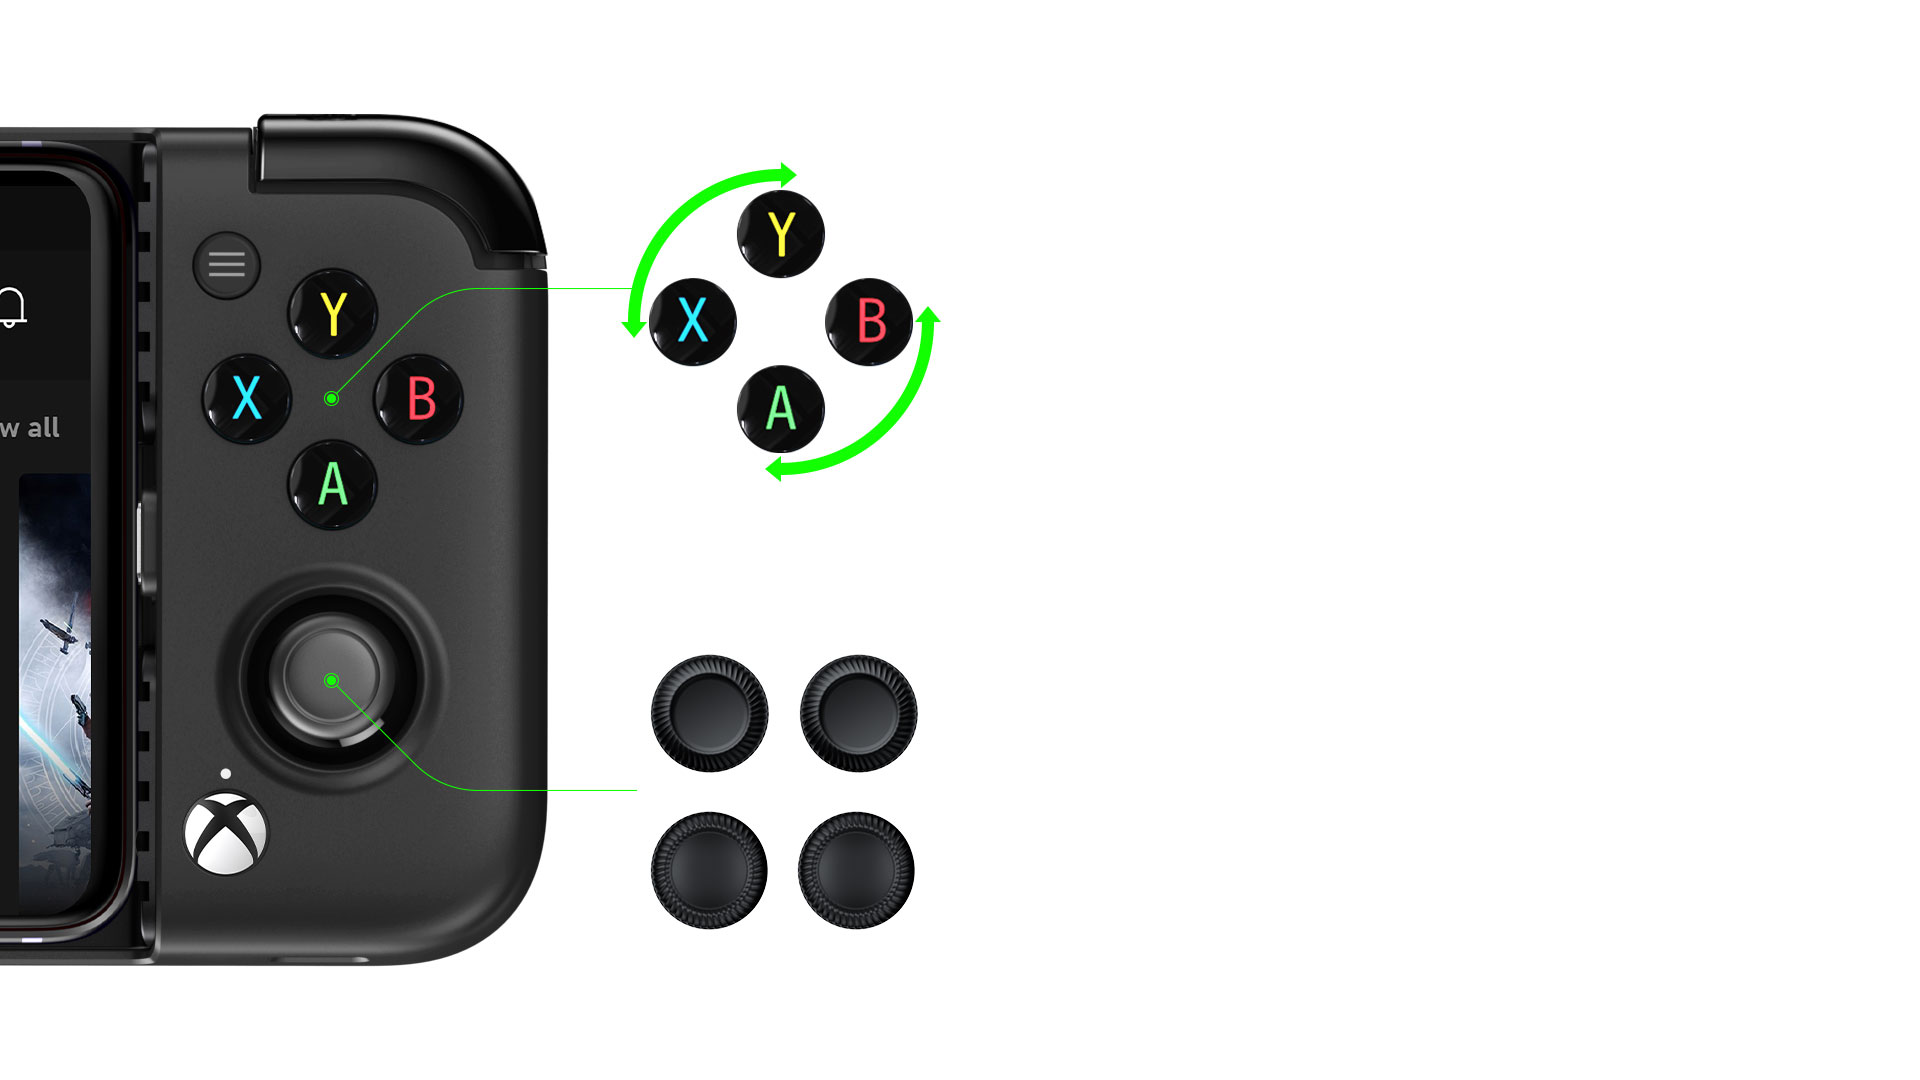 GameSir X2 Pro Mobile Gaming Controller for Android | Xbox